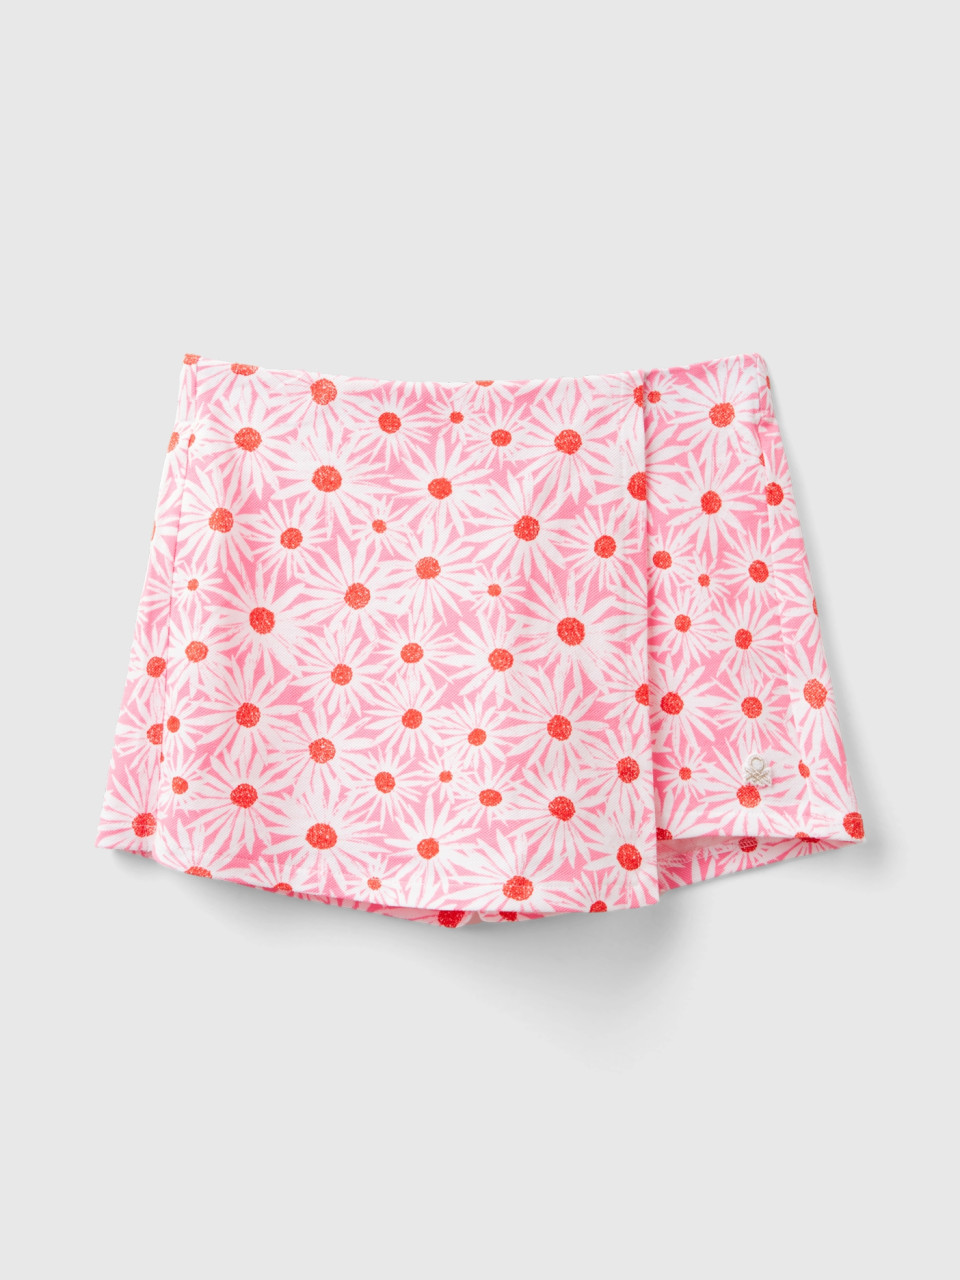 Benetton, Pink Culottes With Floral Print, Pink, Kids